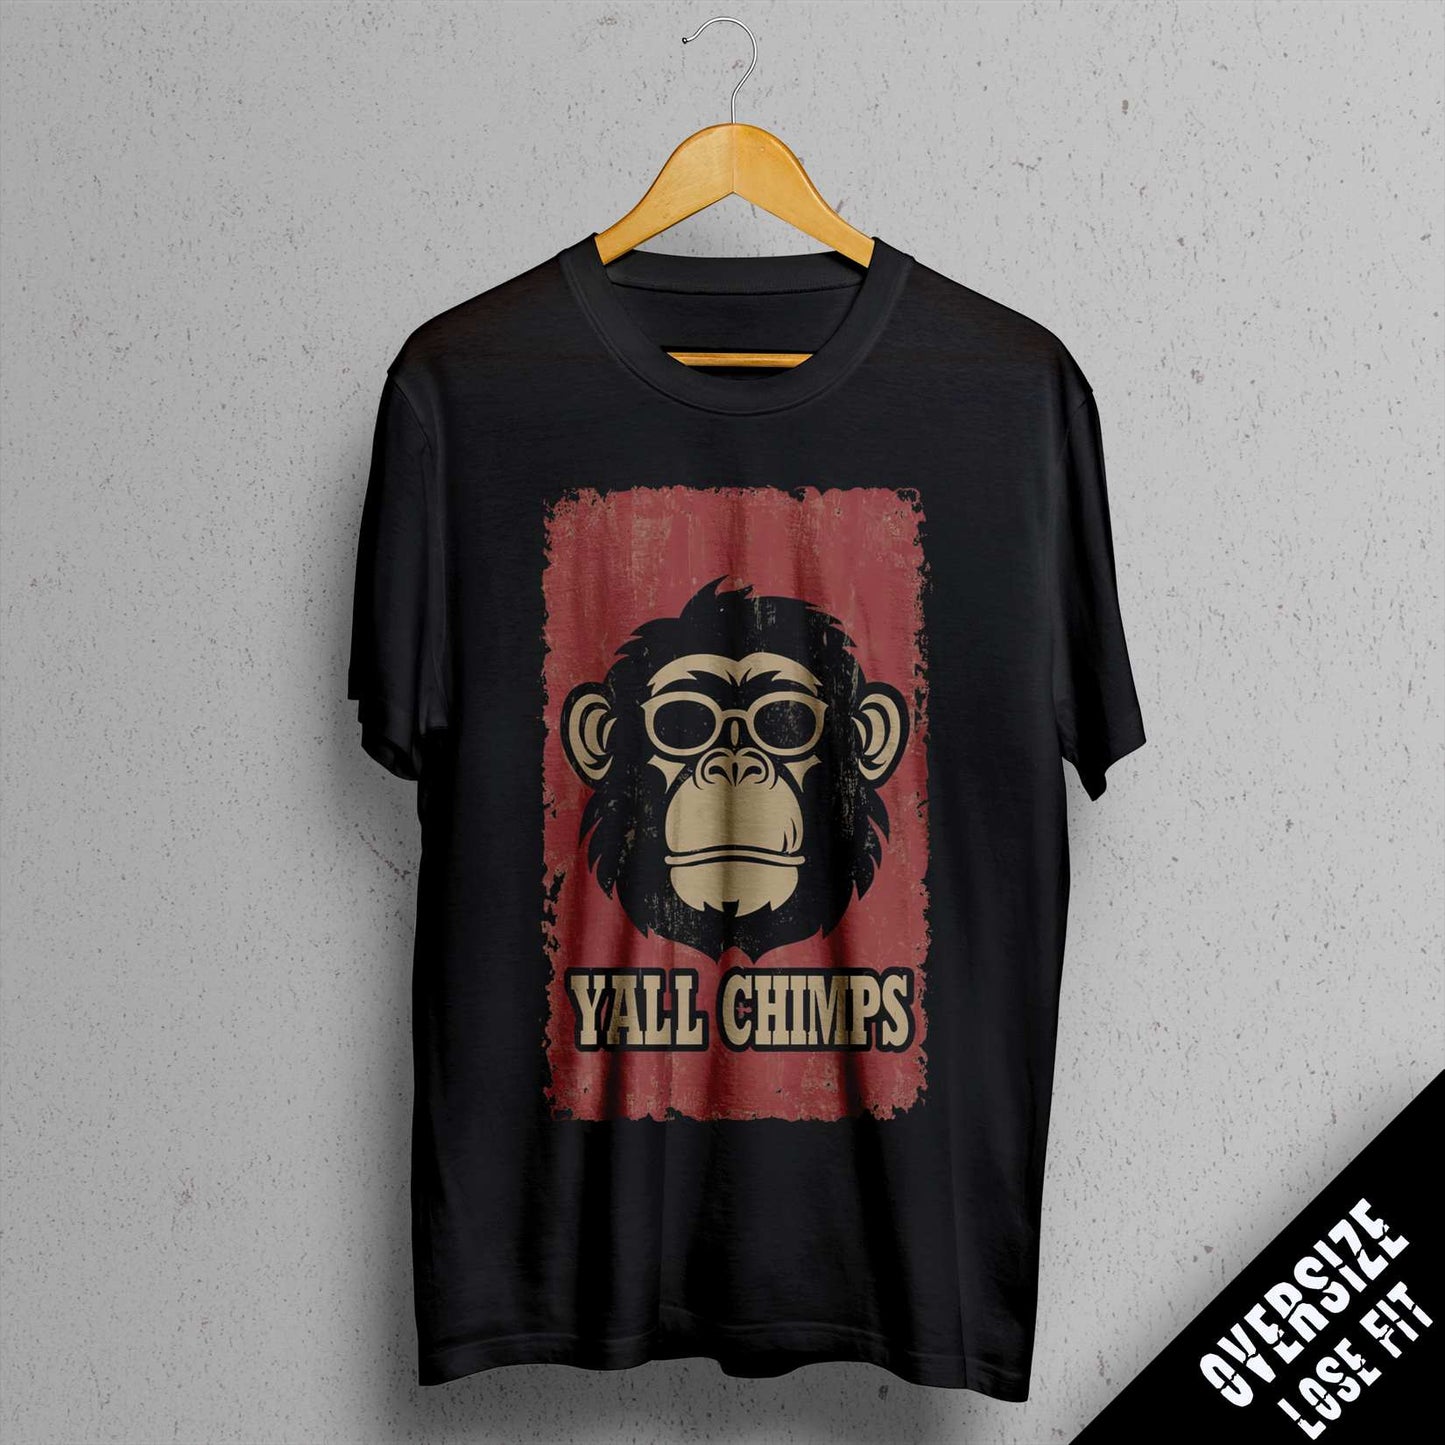 TEE NR 512 | YALL CHIMPS | CHIMPAZEE COOL ANIMAL SHORT SLEEVE T-SHIRT FOR M/F